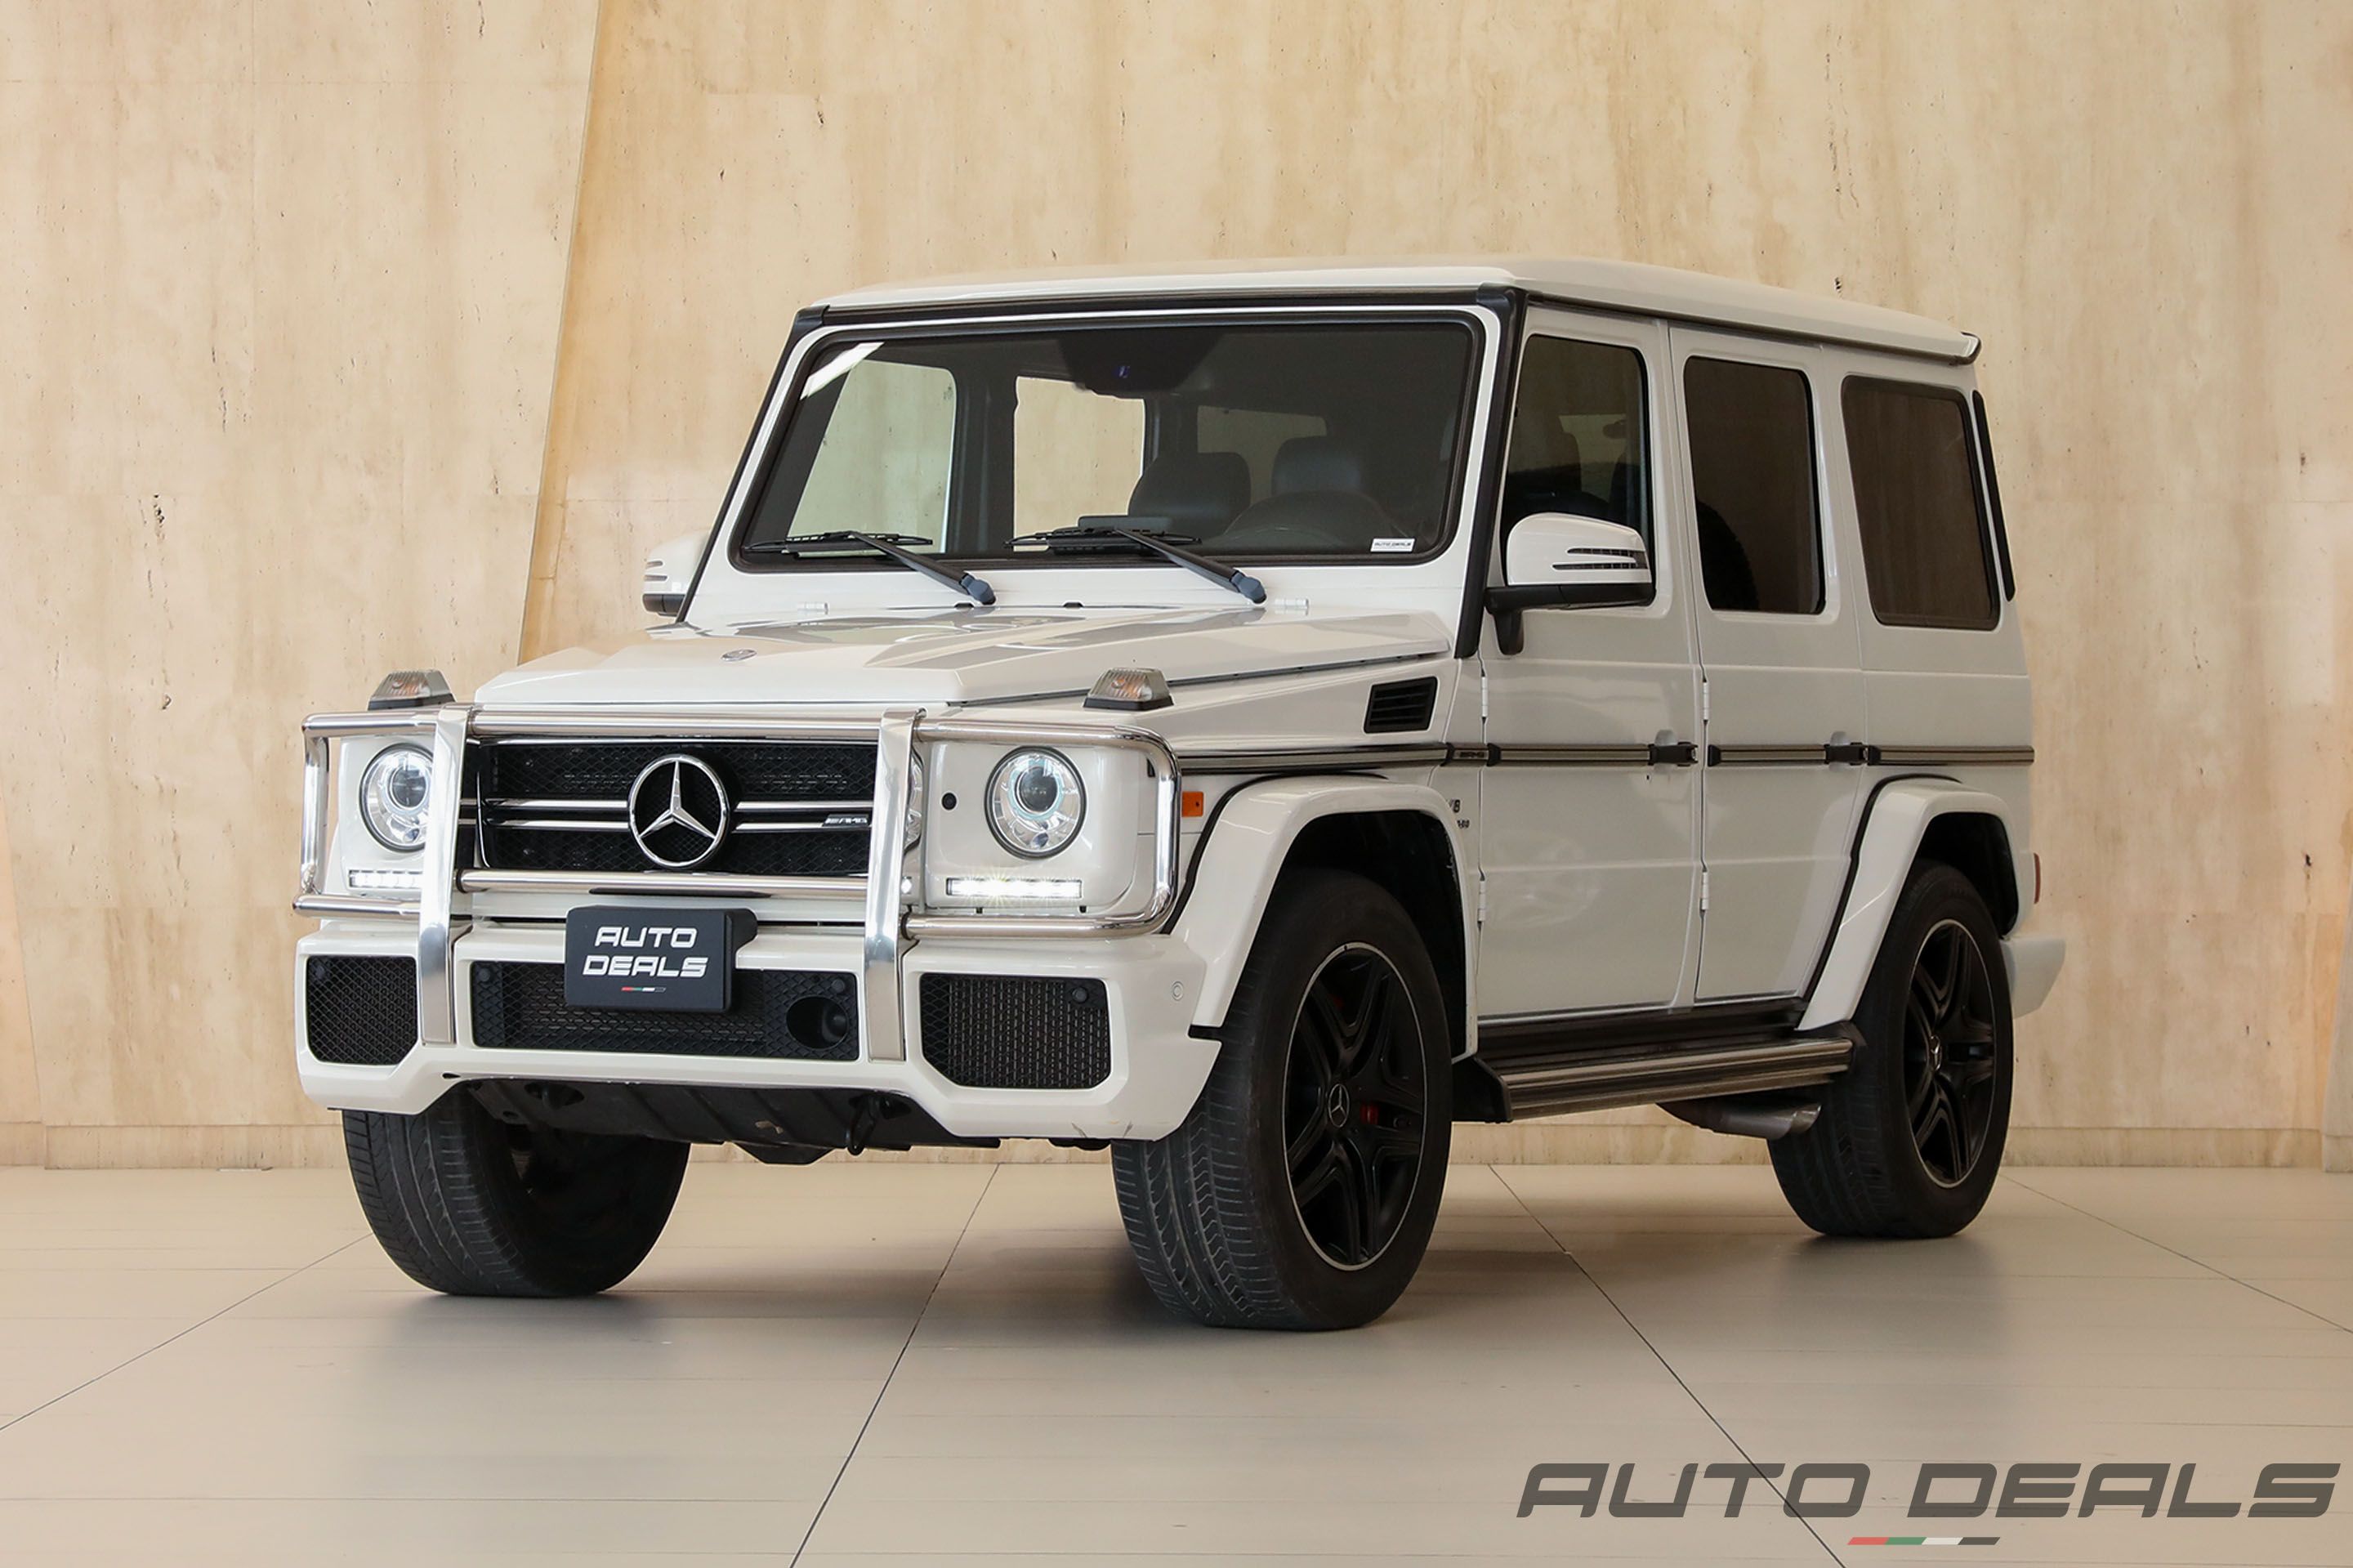 Mercedes Benz G63 AMG | 2017 - Well Maintained - Superior Wagon - Immaculate Condition | 5.5L V8